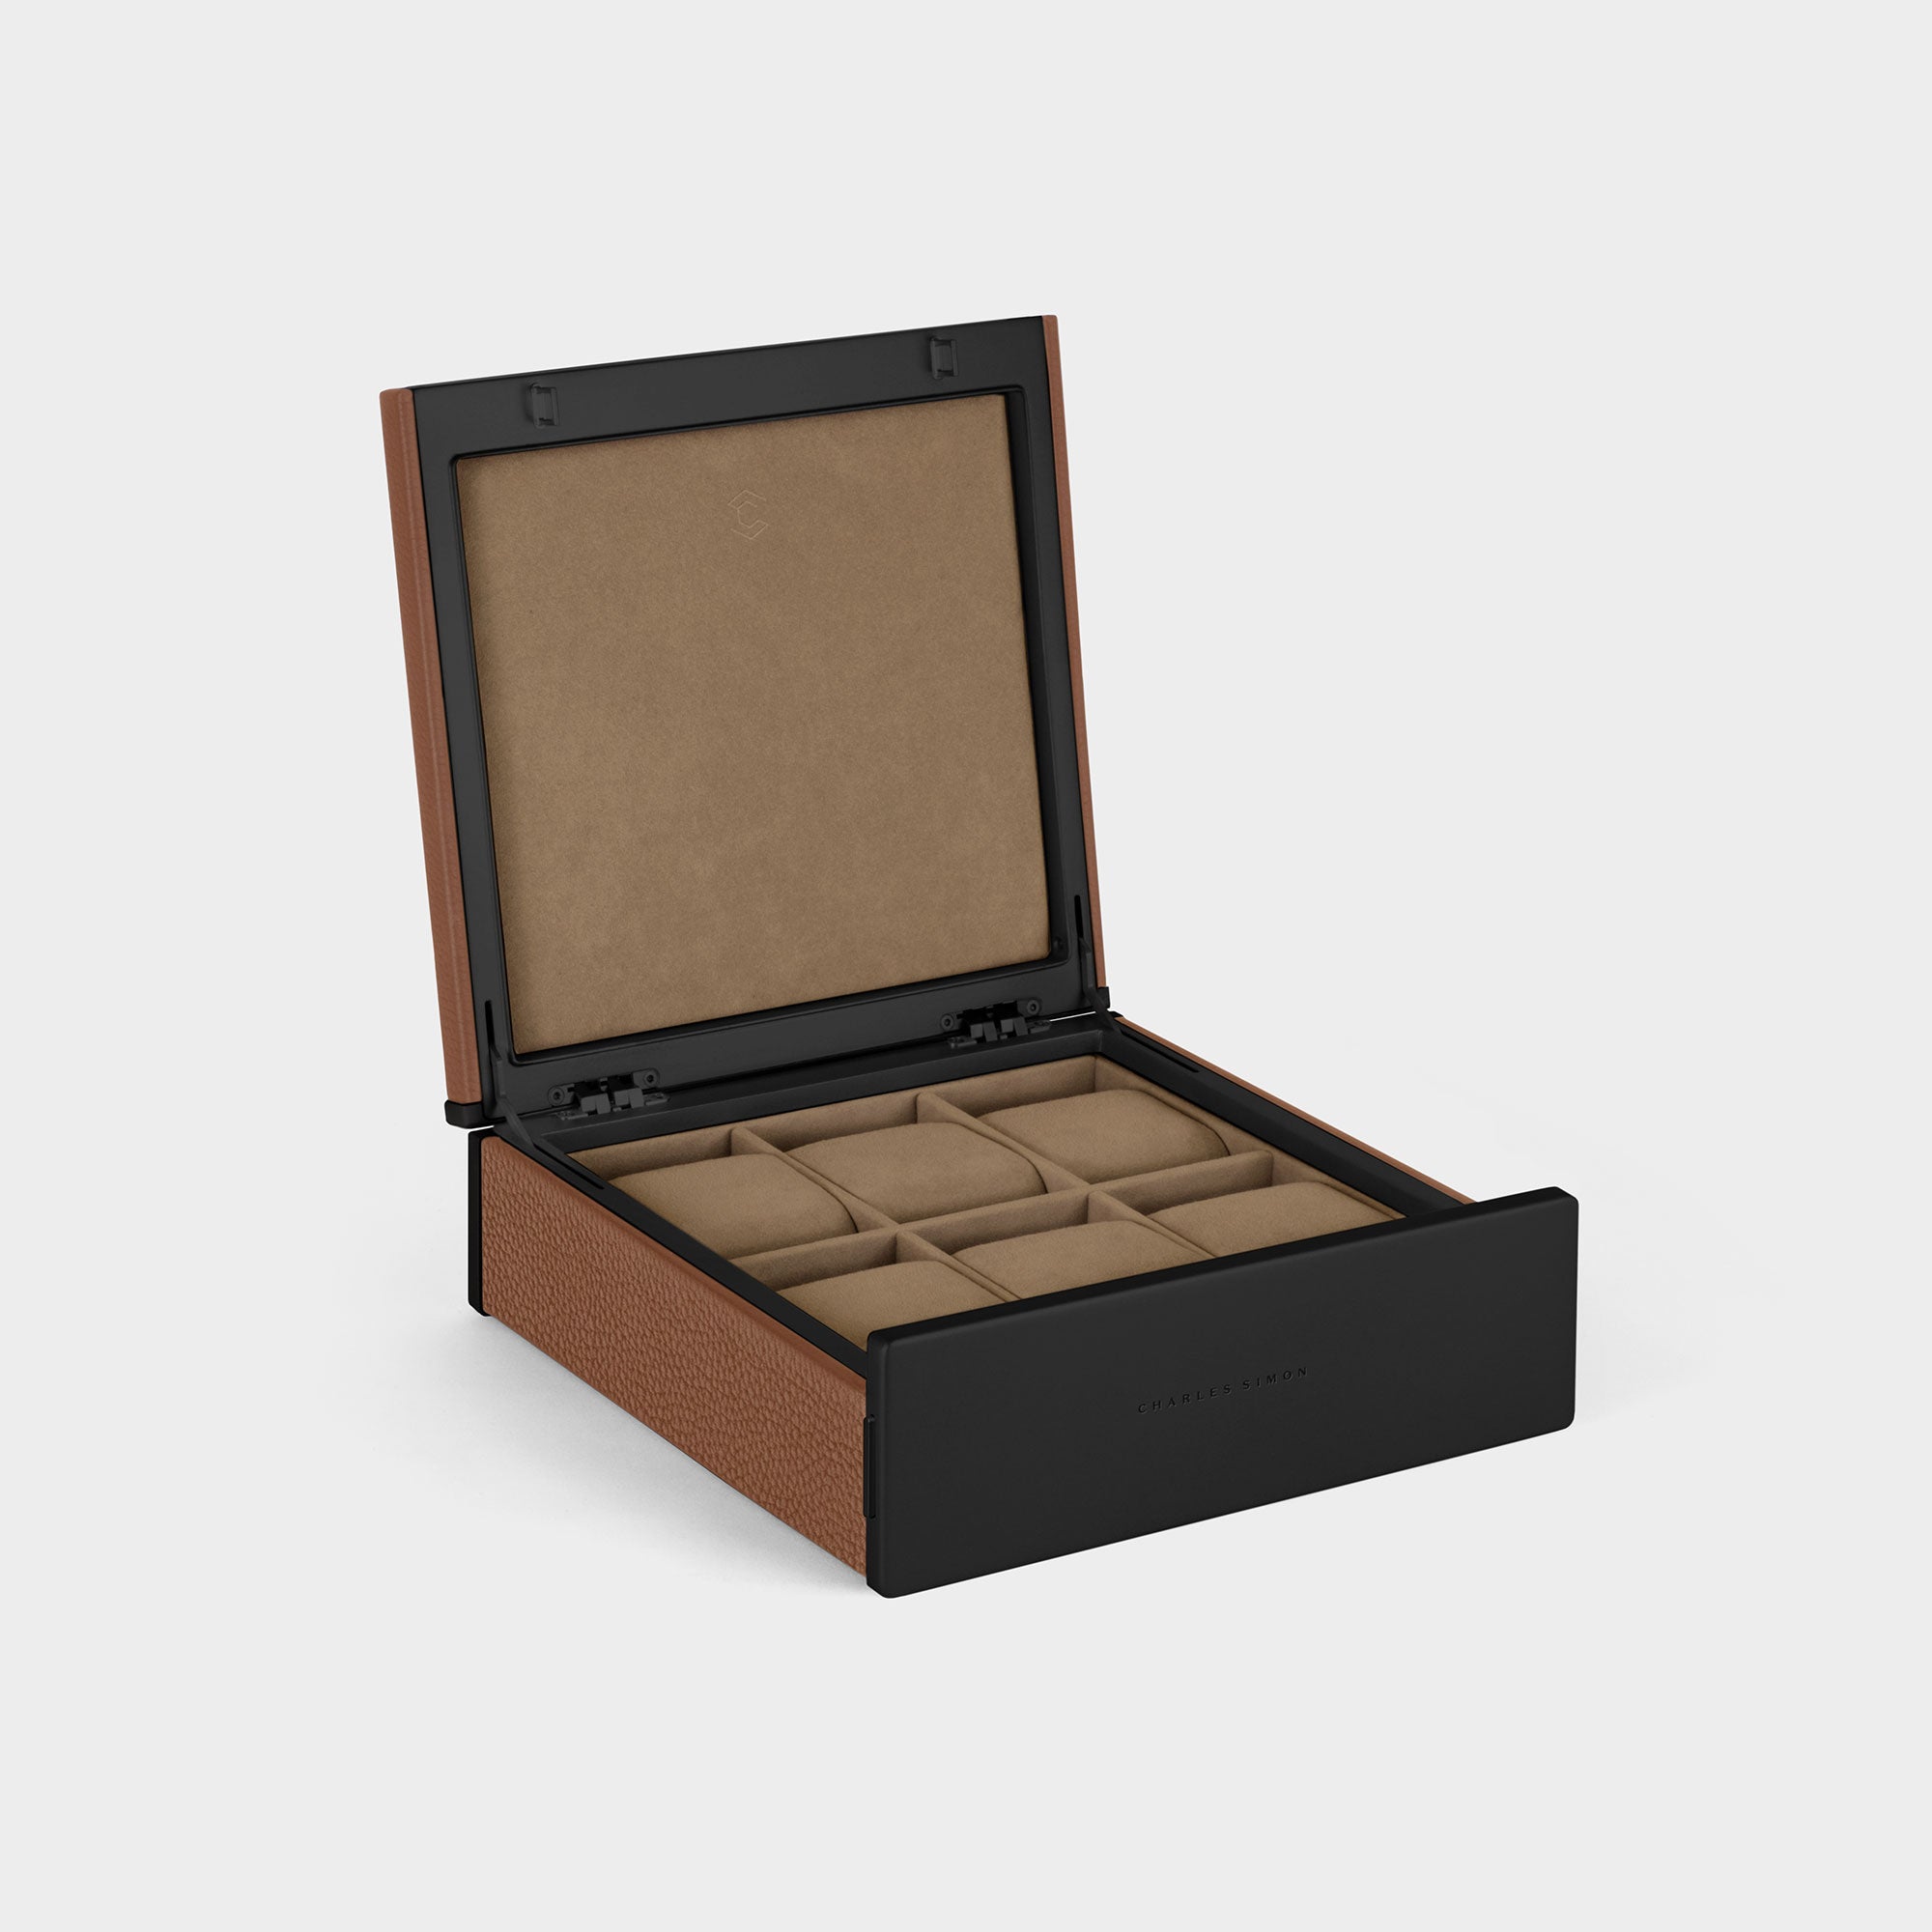 Handmade watch box for 6 watches in tan leather, carbon fiber and anodized aluminum casing and Camel Alcantara interior